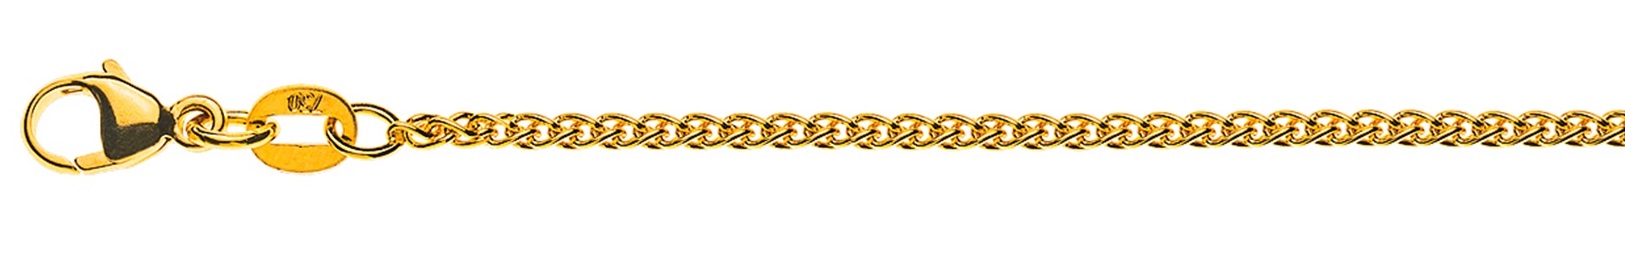 AURONOS Style Necklace yellow gold 9K cable chain 38cm 1.65mm